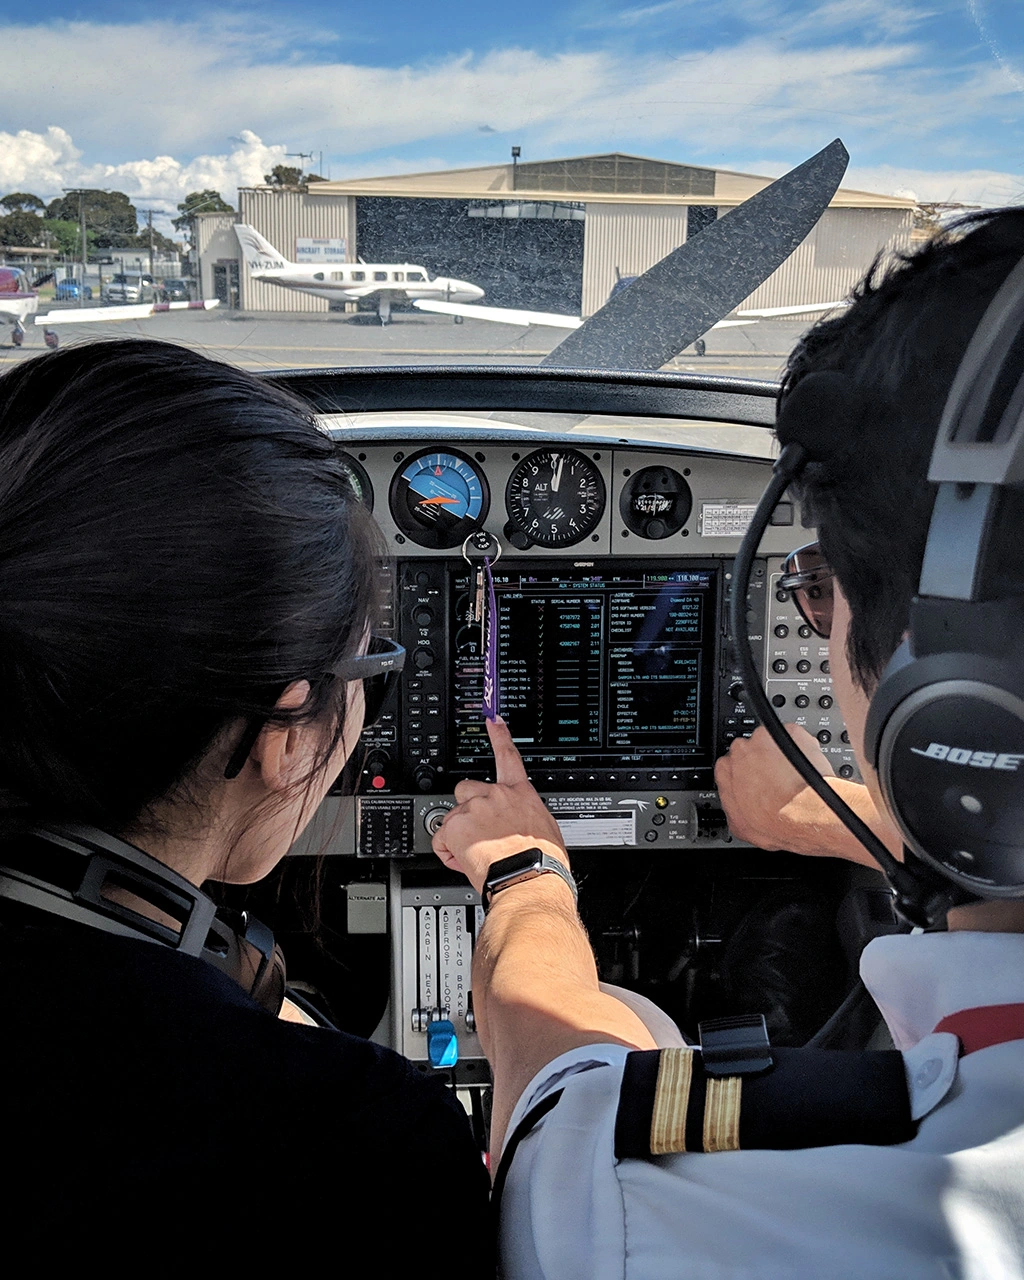 6 Ways to Maintain Pilot Proficiency and Safety